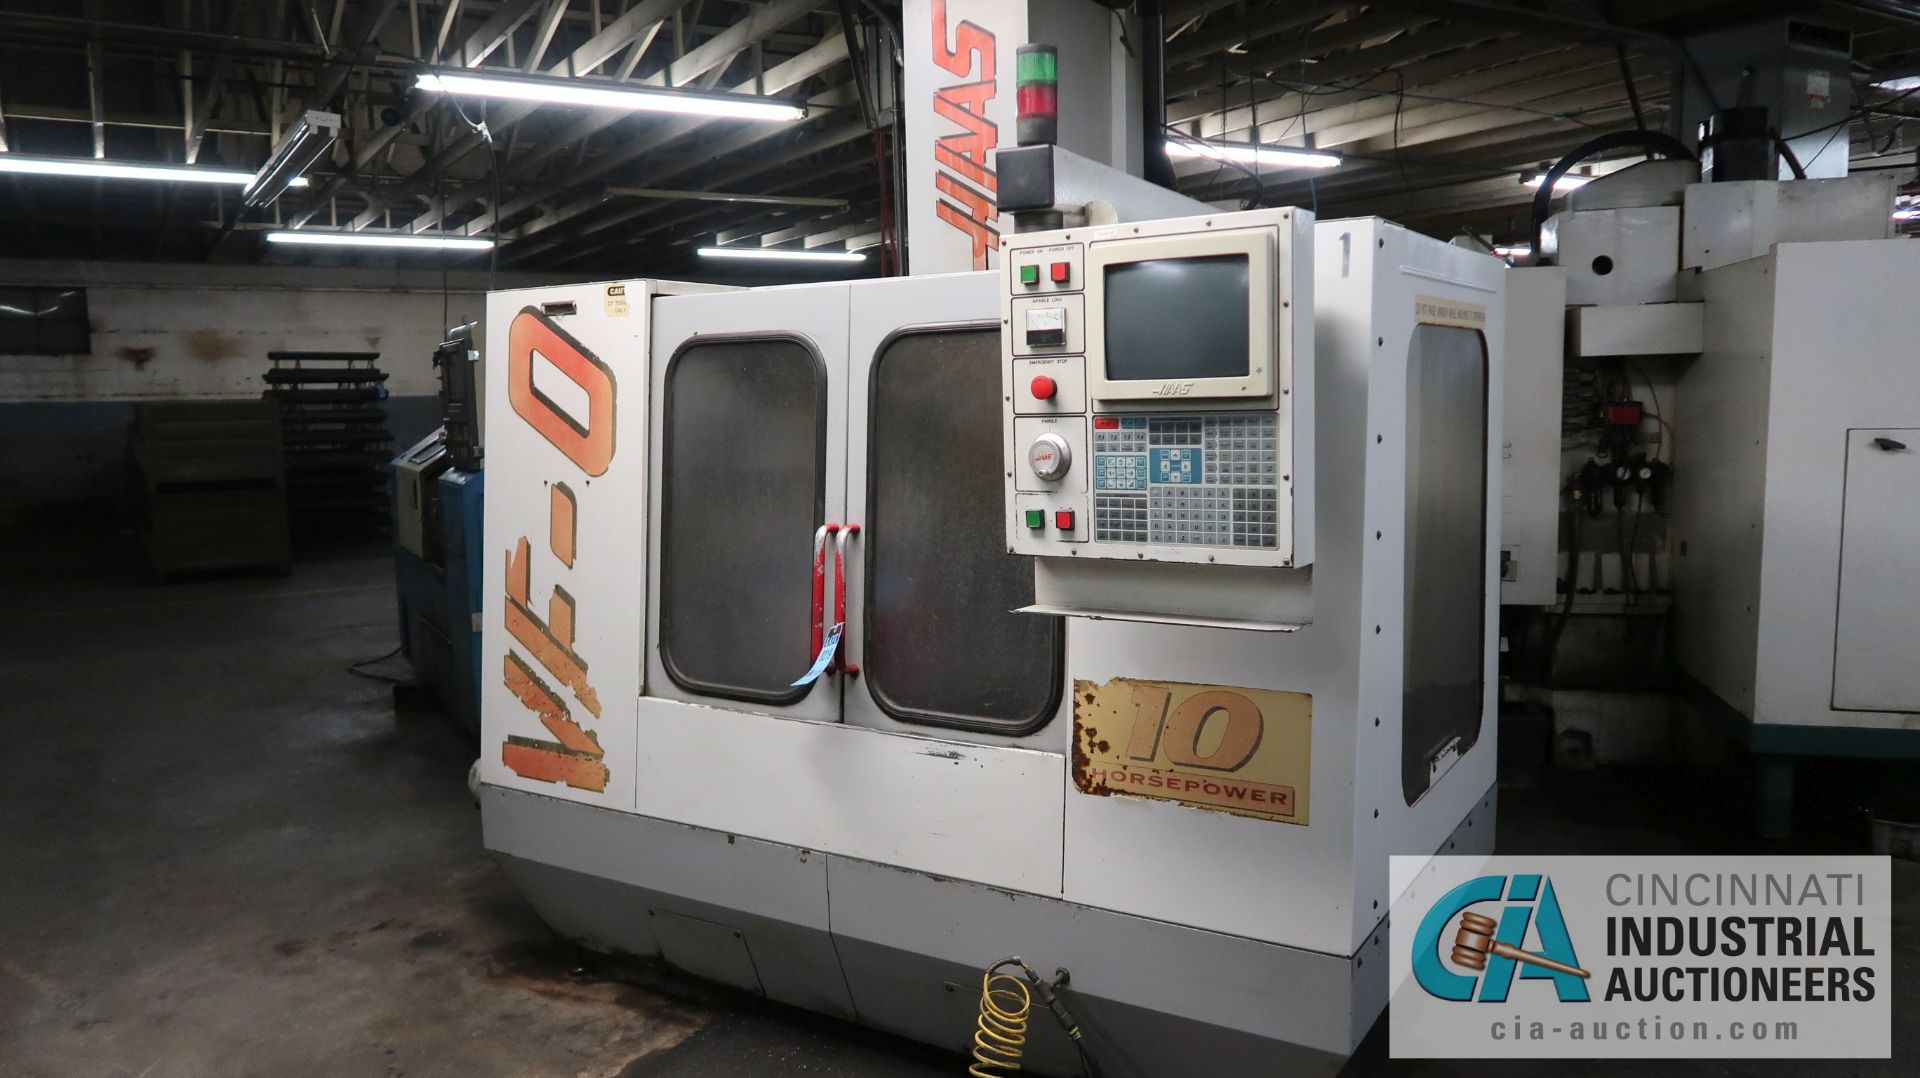 HAAS MODEL VF-0 CNC VERTICAL MACHINING CENTER; S/N 6946, 14" x 26" TABLE, 10-HP DRIVE, PRO 6 COOLANT